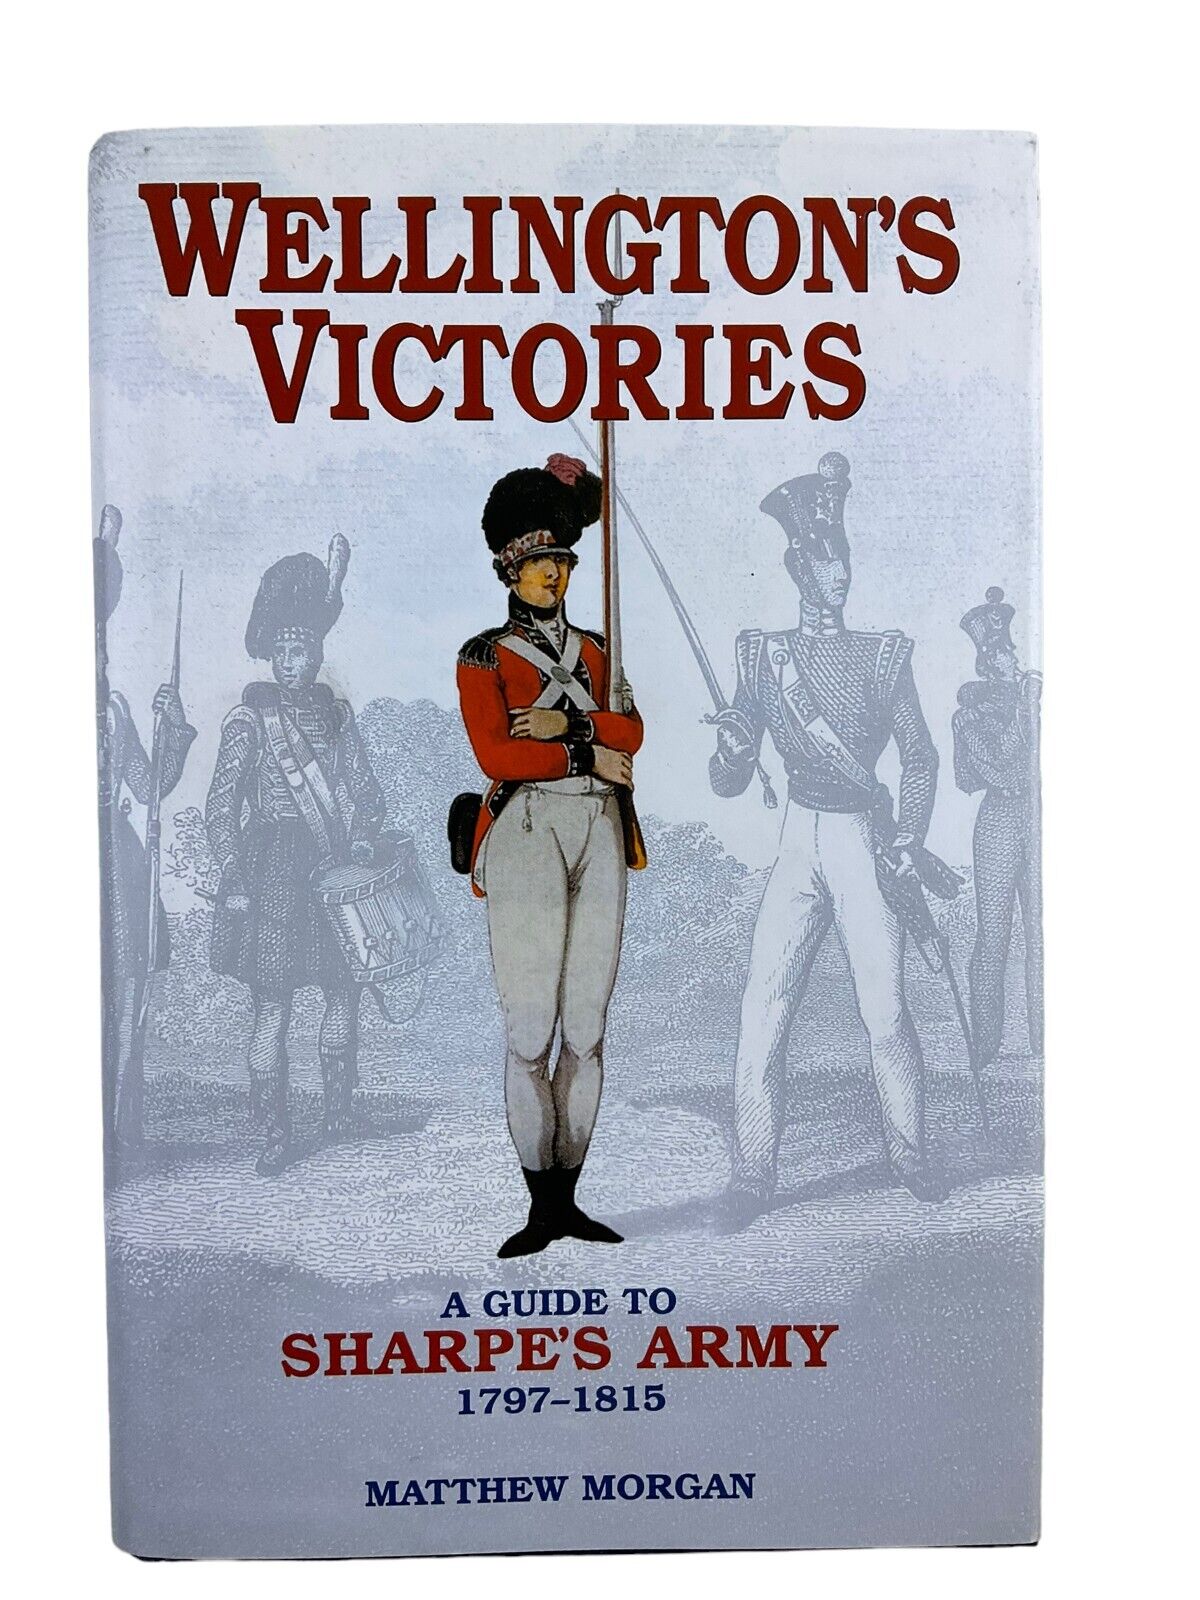 British French Napoleonic Wellingtons Victories Sharpes Army HC Reference Book